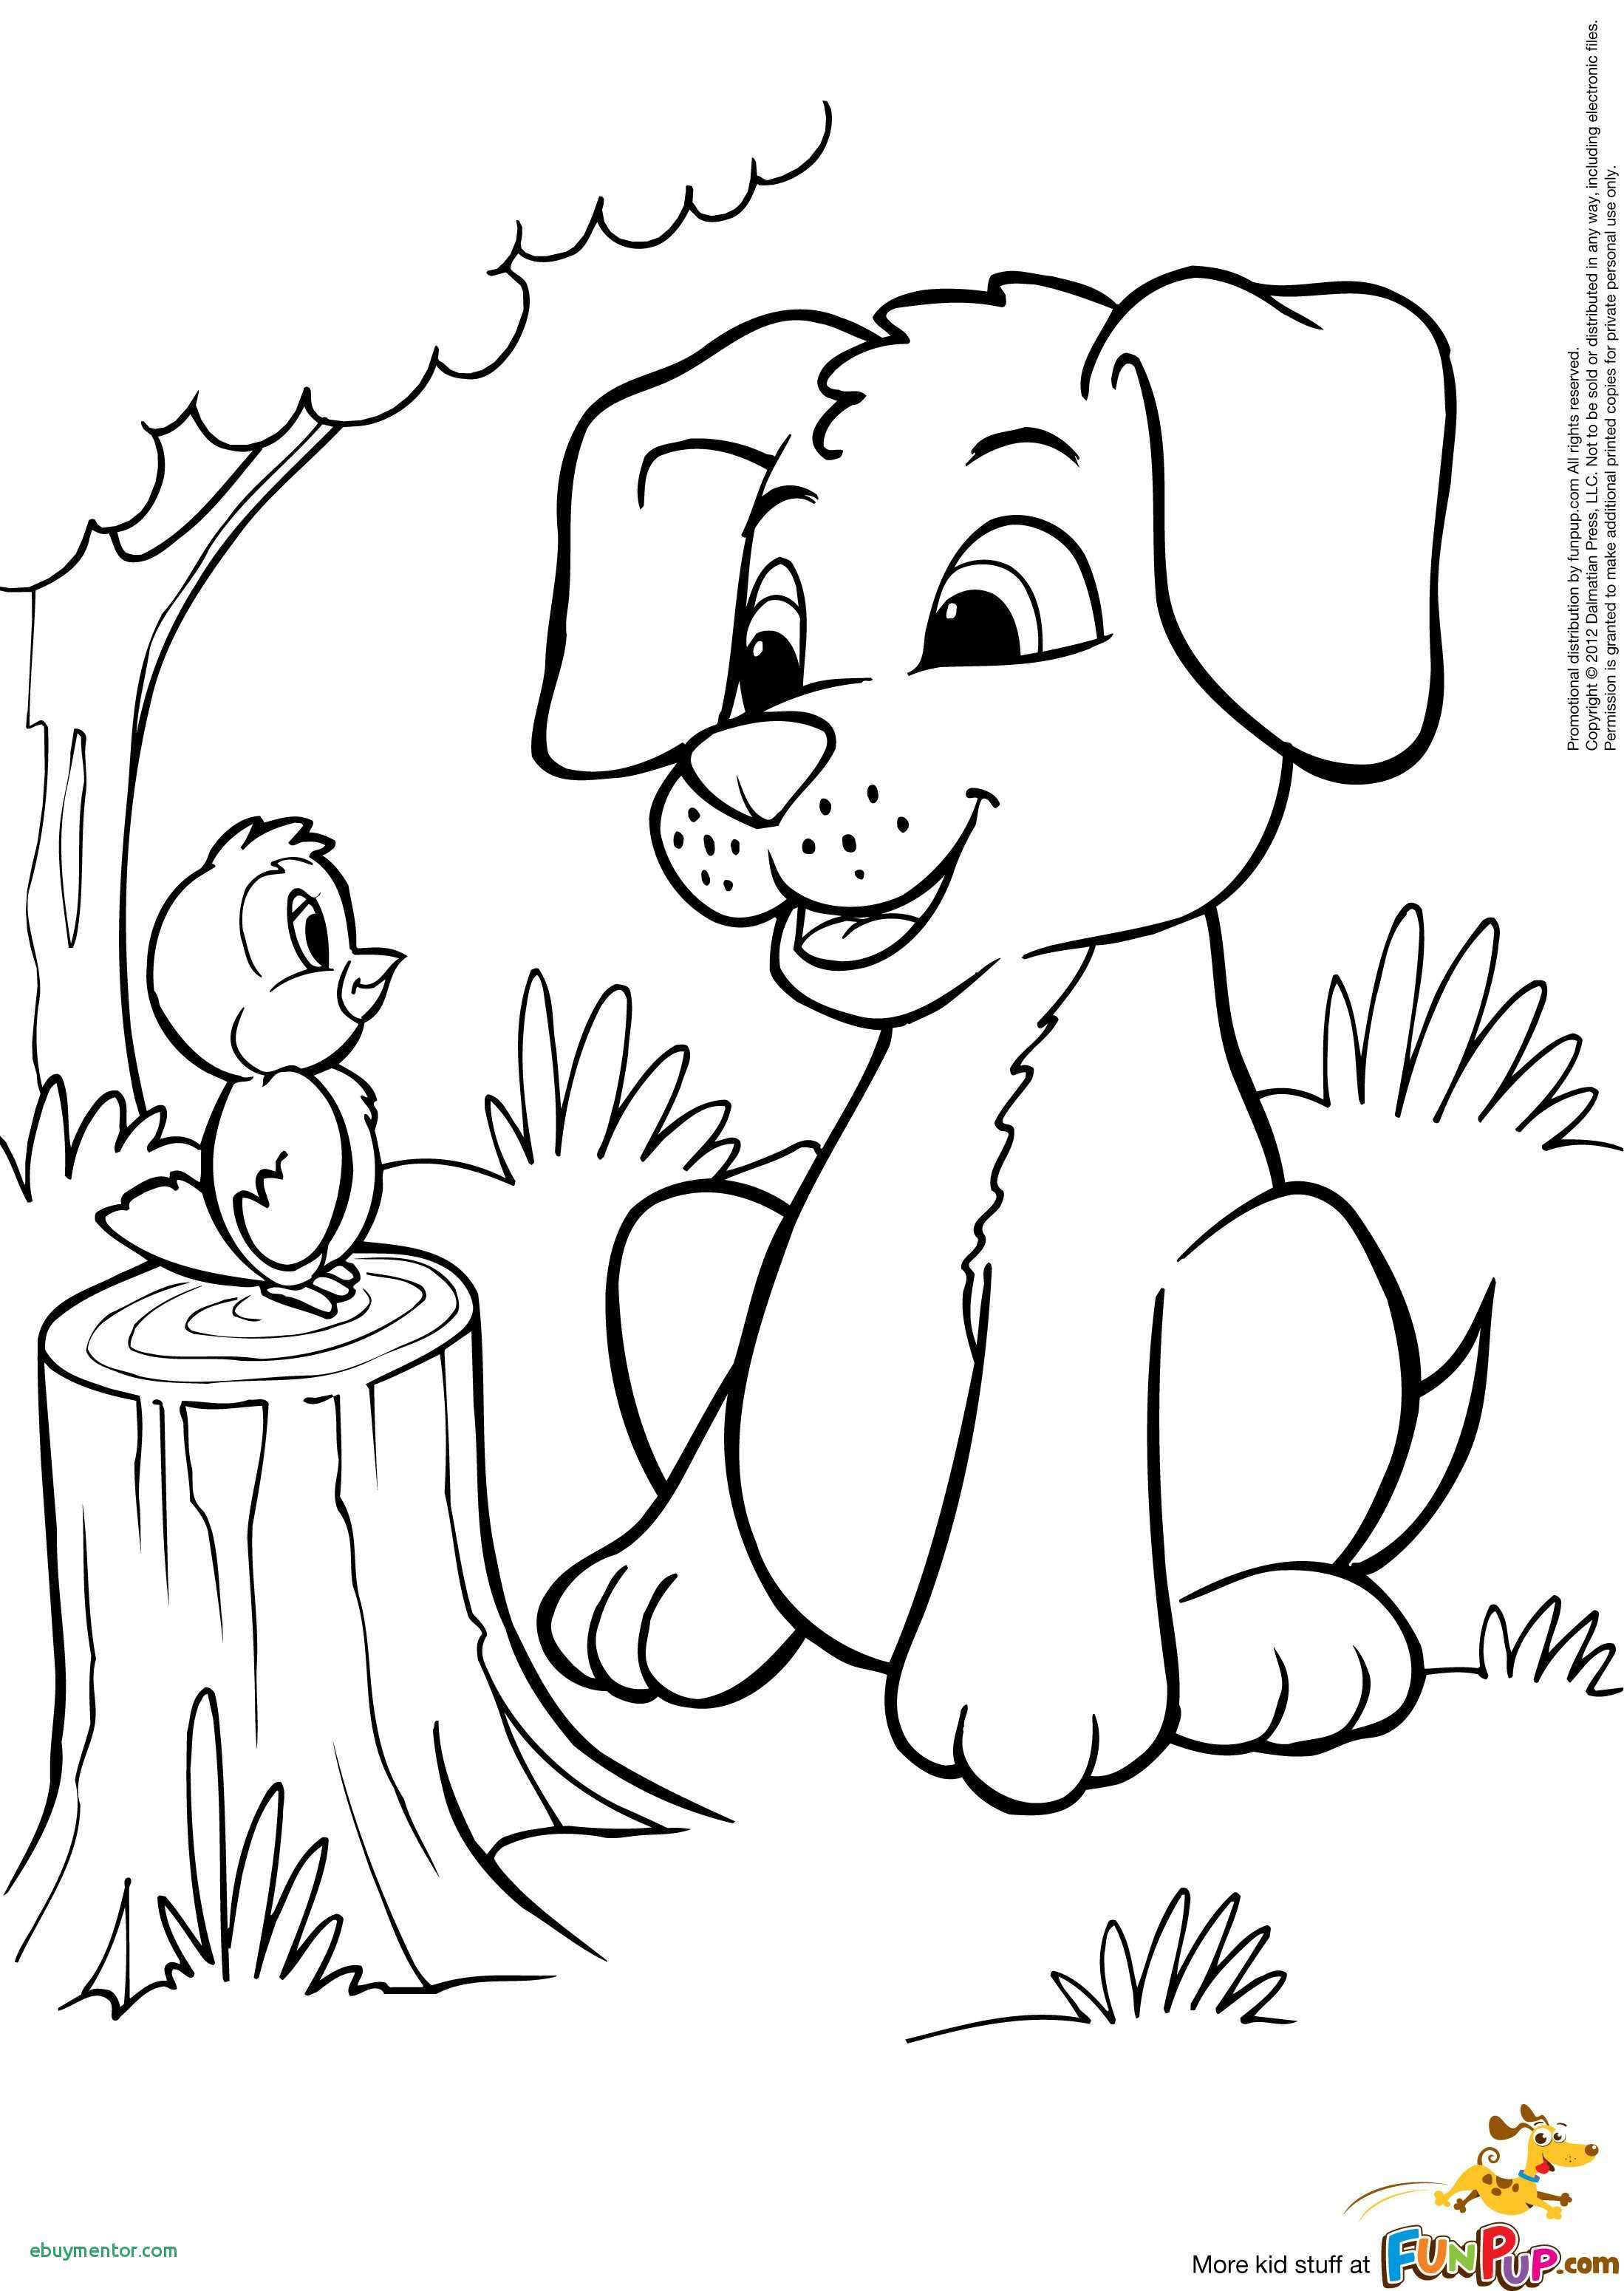 Christmas Puppy Coloring Pages Puppy and Kitten Drawing at Getdrawings Lovely Christmas Puppies